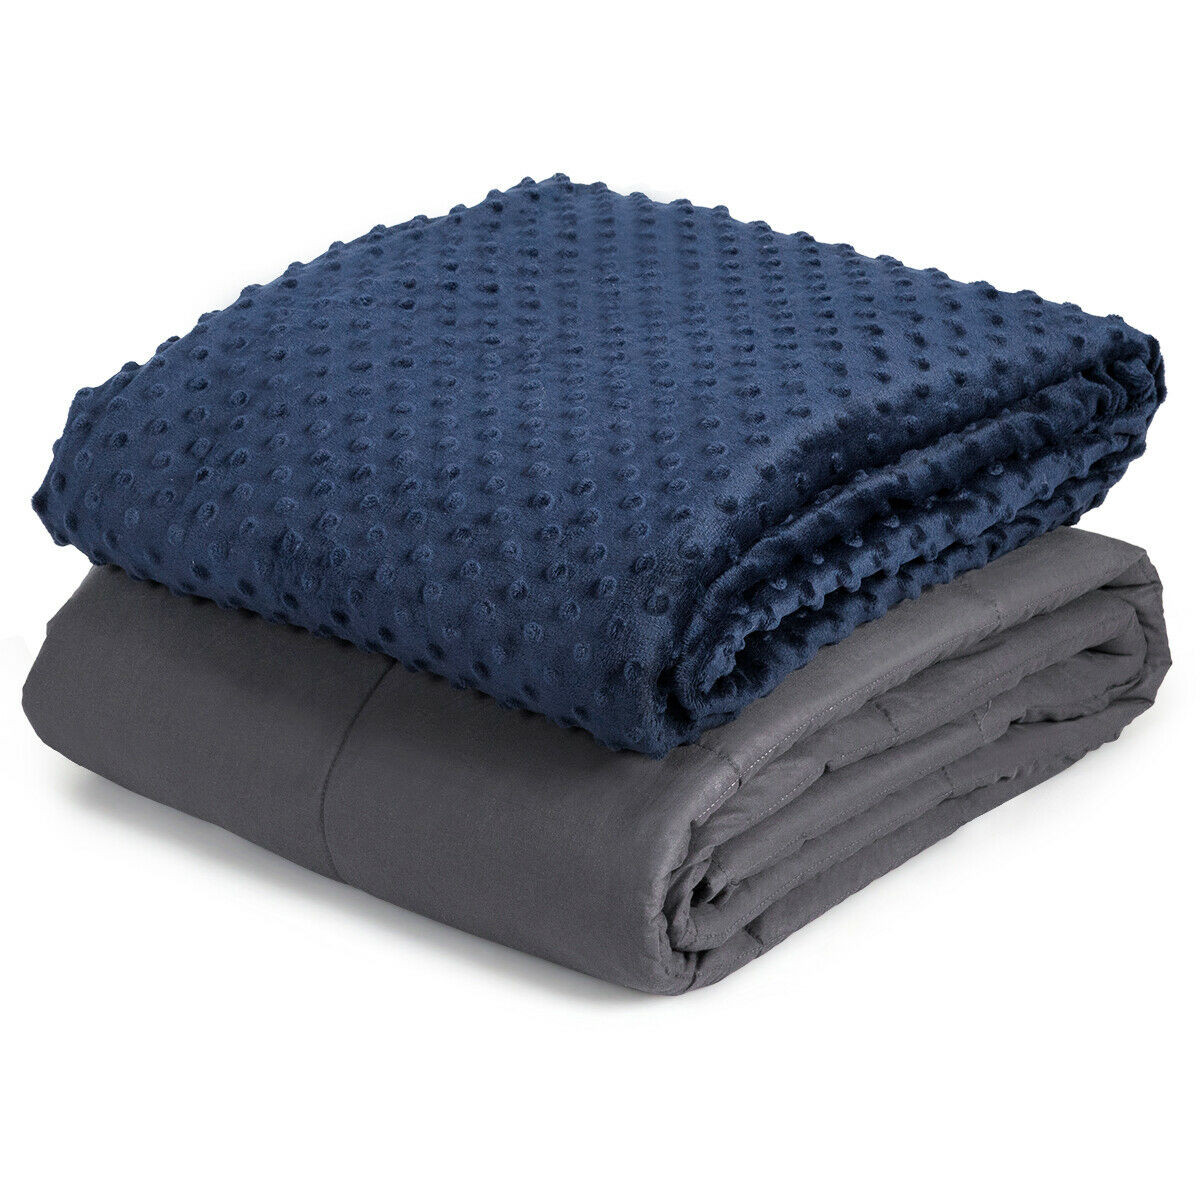 15 lbs 48 In. x 72 In. Weighted Blanket With Glass Bead